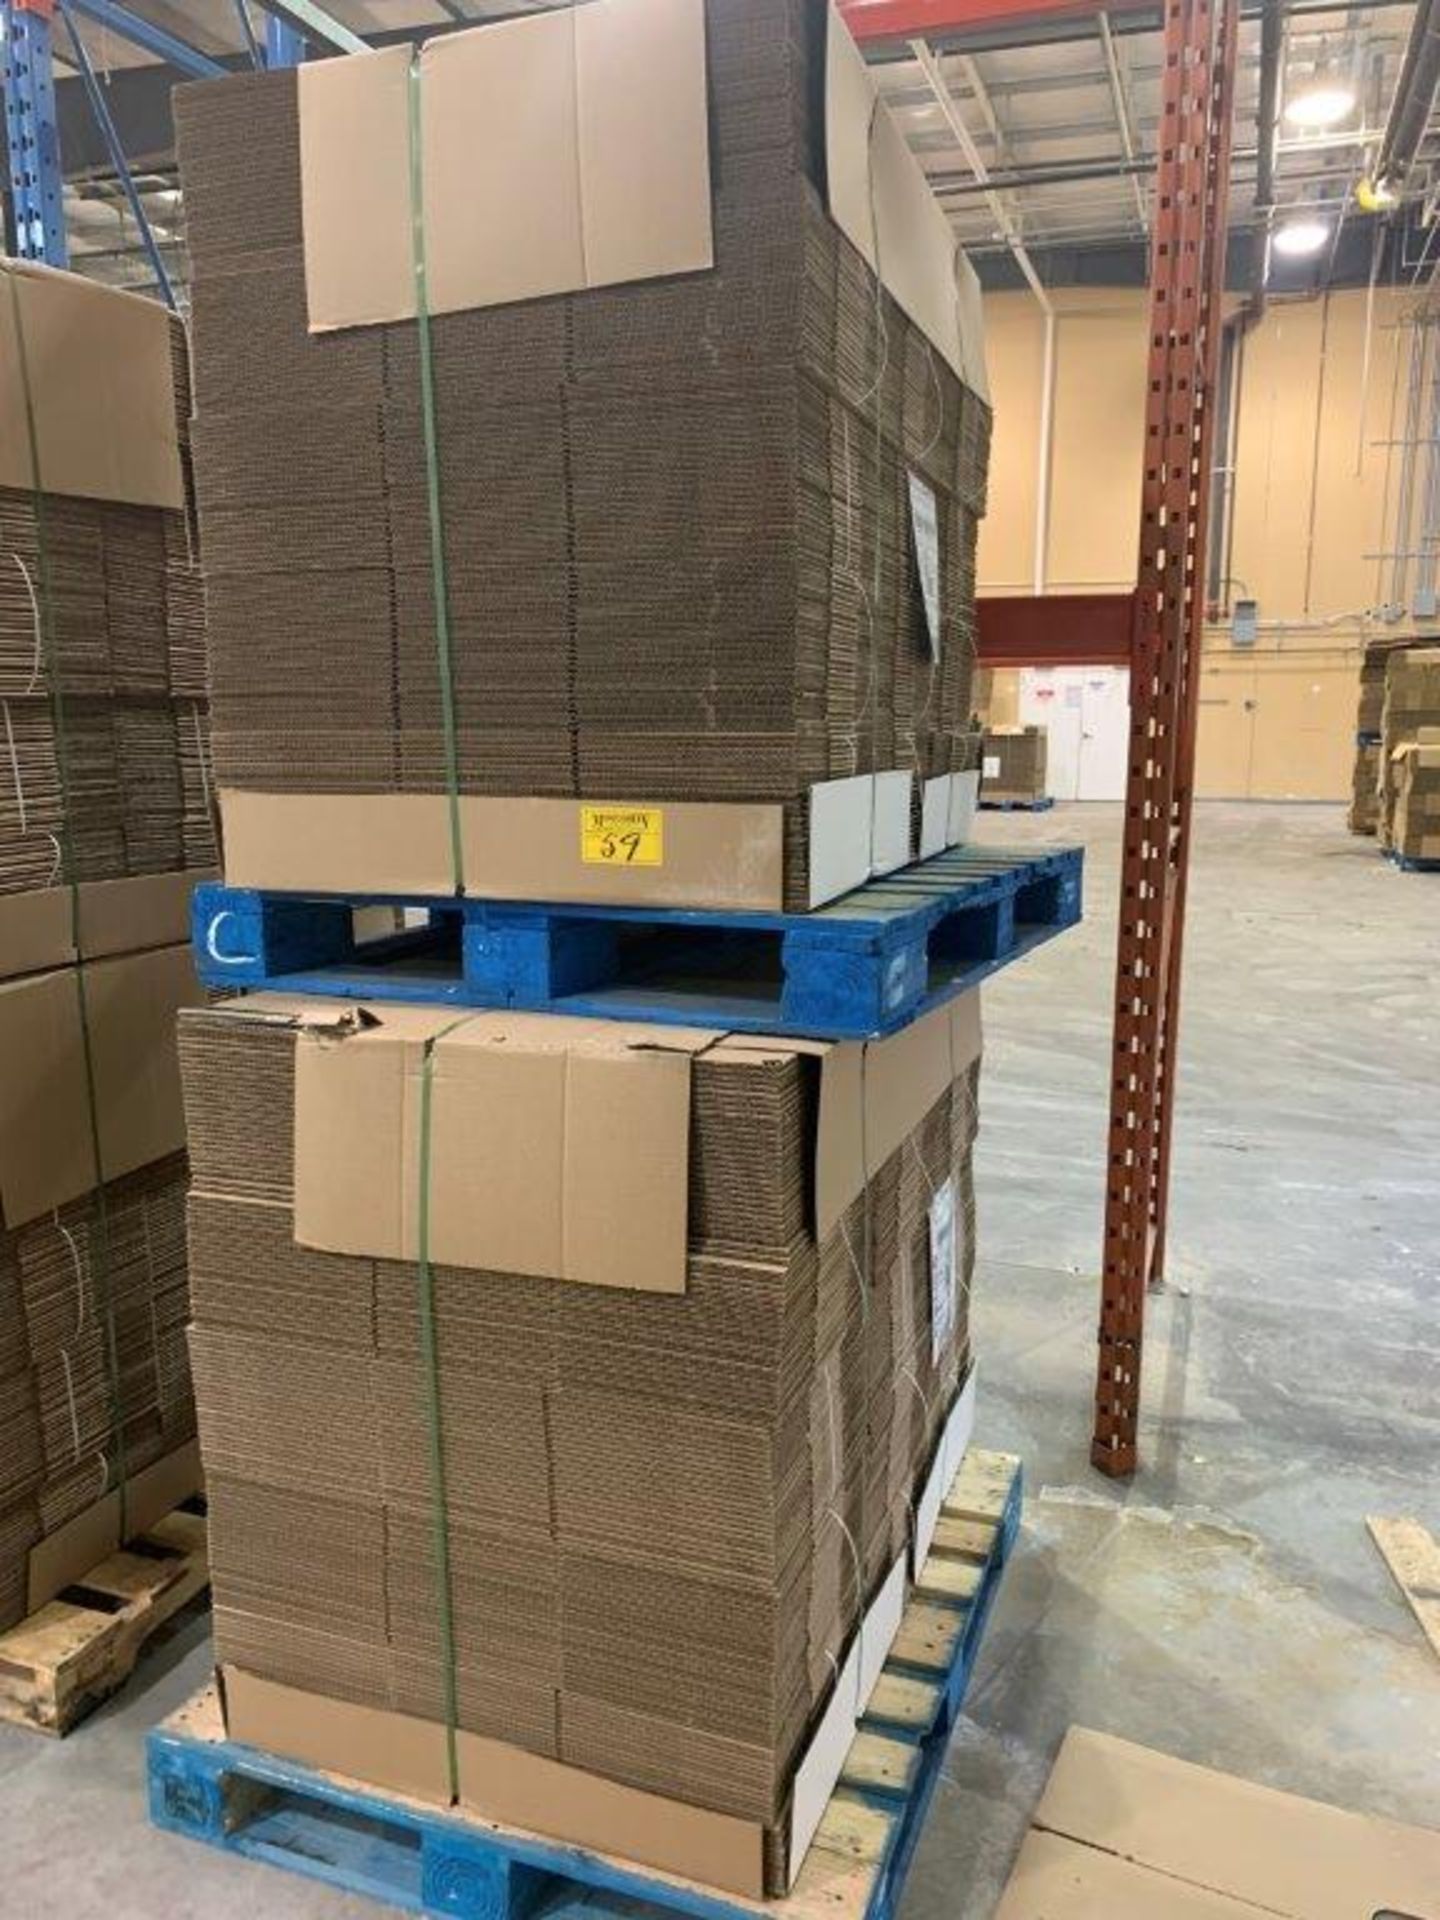 2-PALLETS PF0042 CORRIGATED CARDBOARD BOXES 375 X2 =750 BOXES APPROX 20X11X5 1/2 INCHES